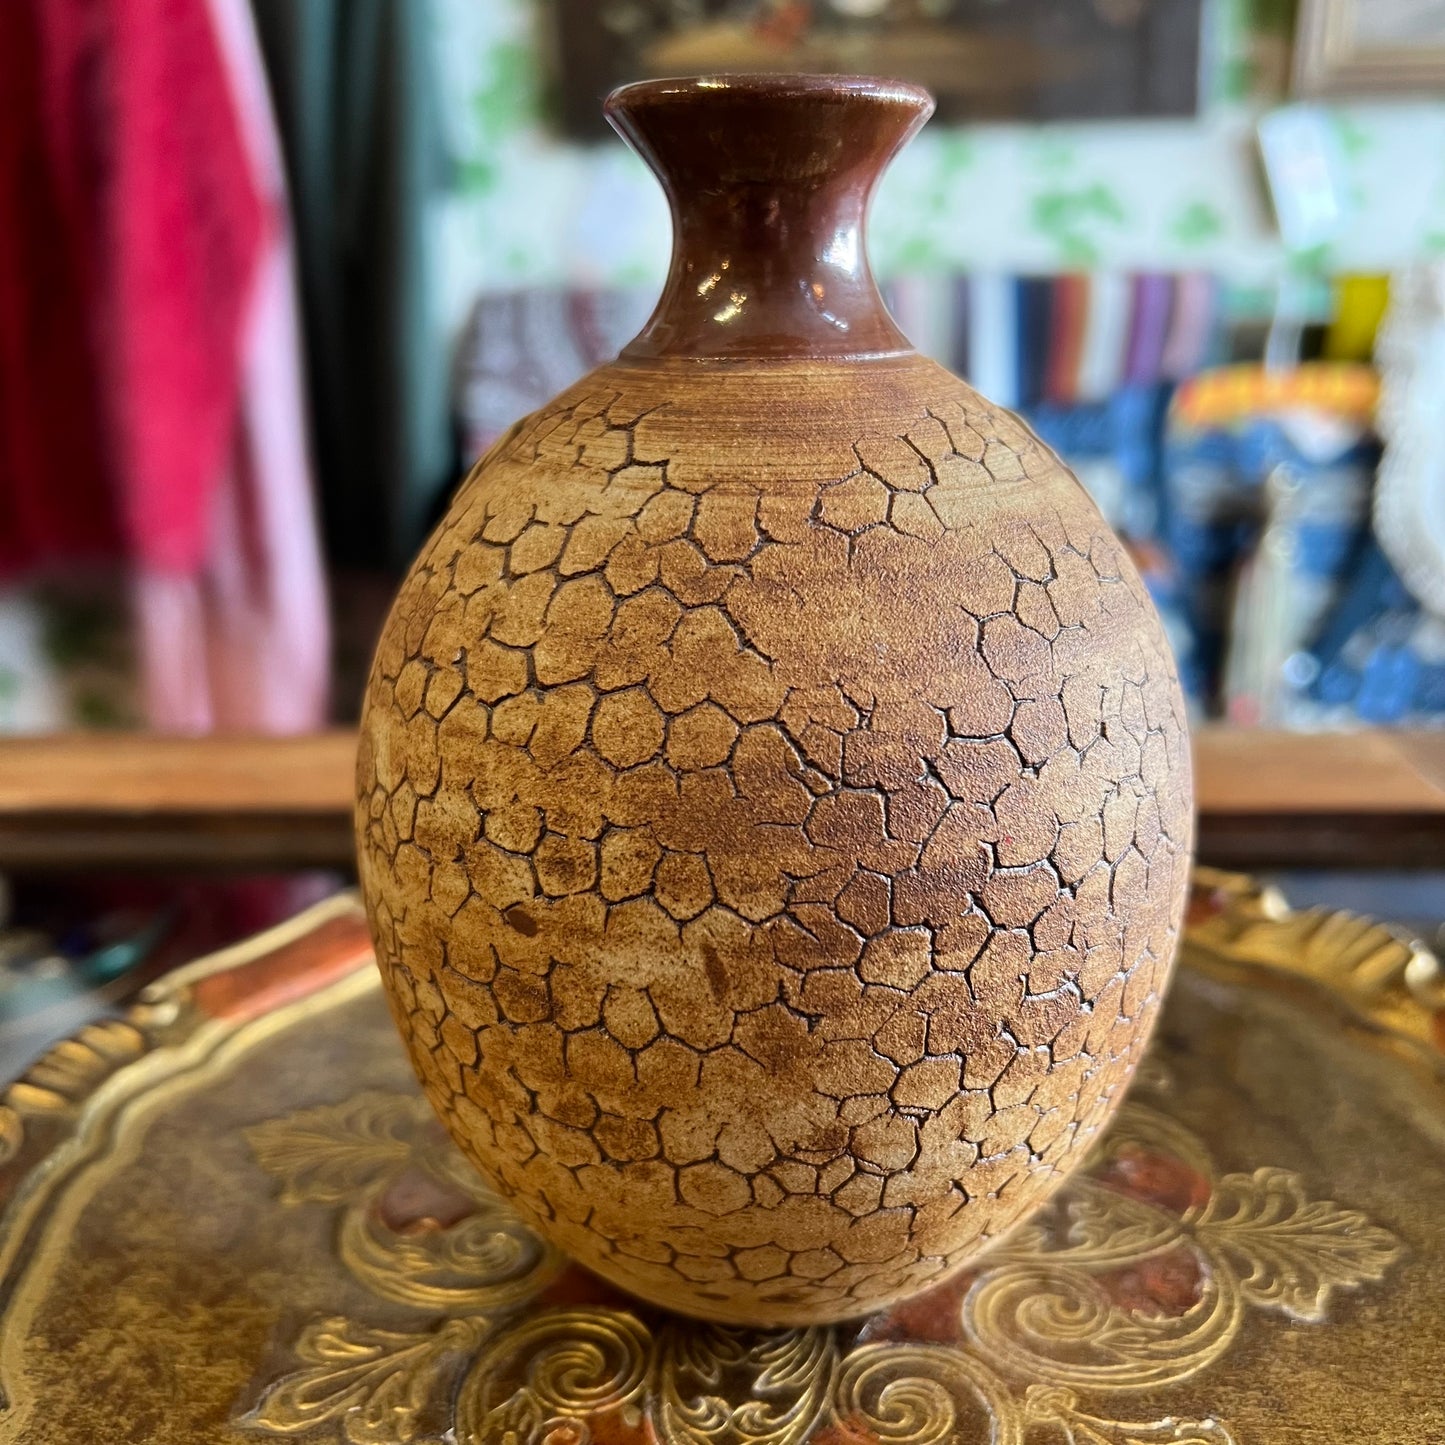 Vintage Wartook Pottery Vase with Gumnuts and Leaves